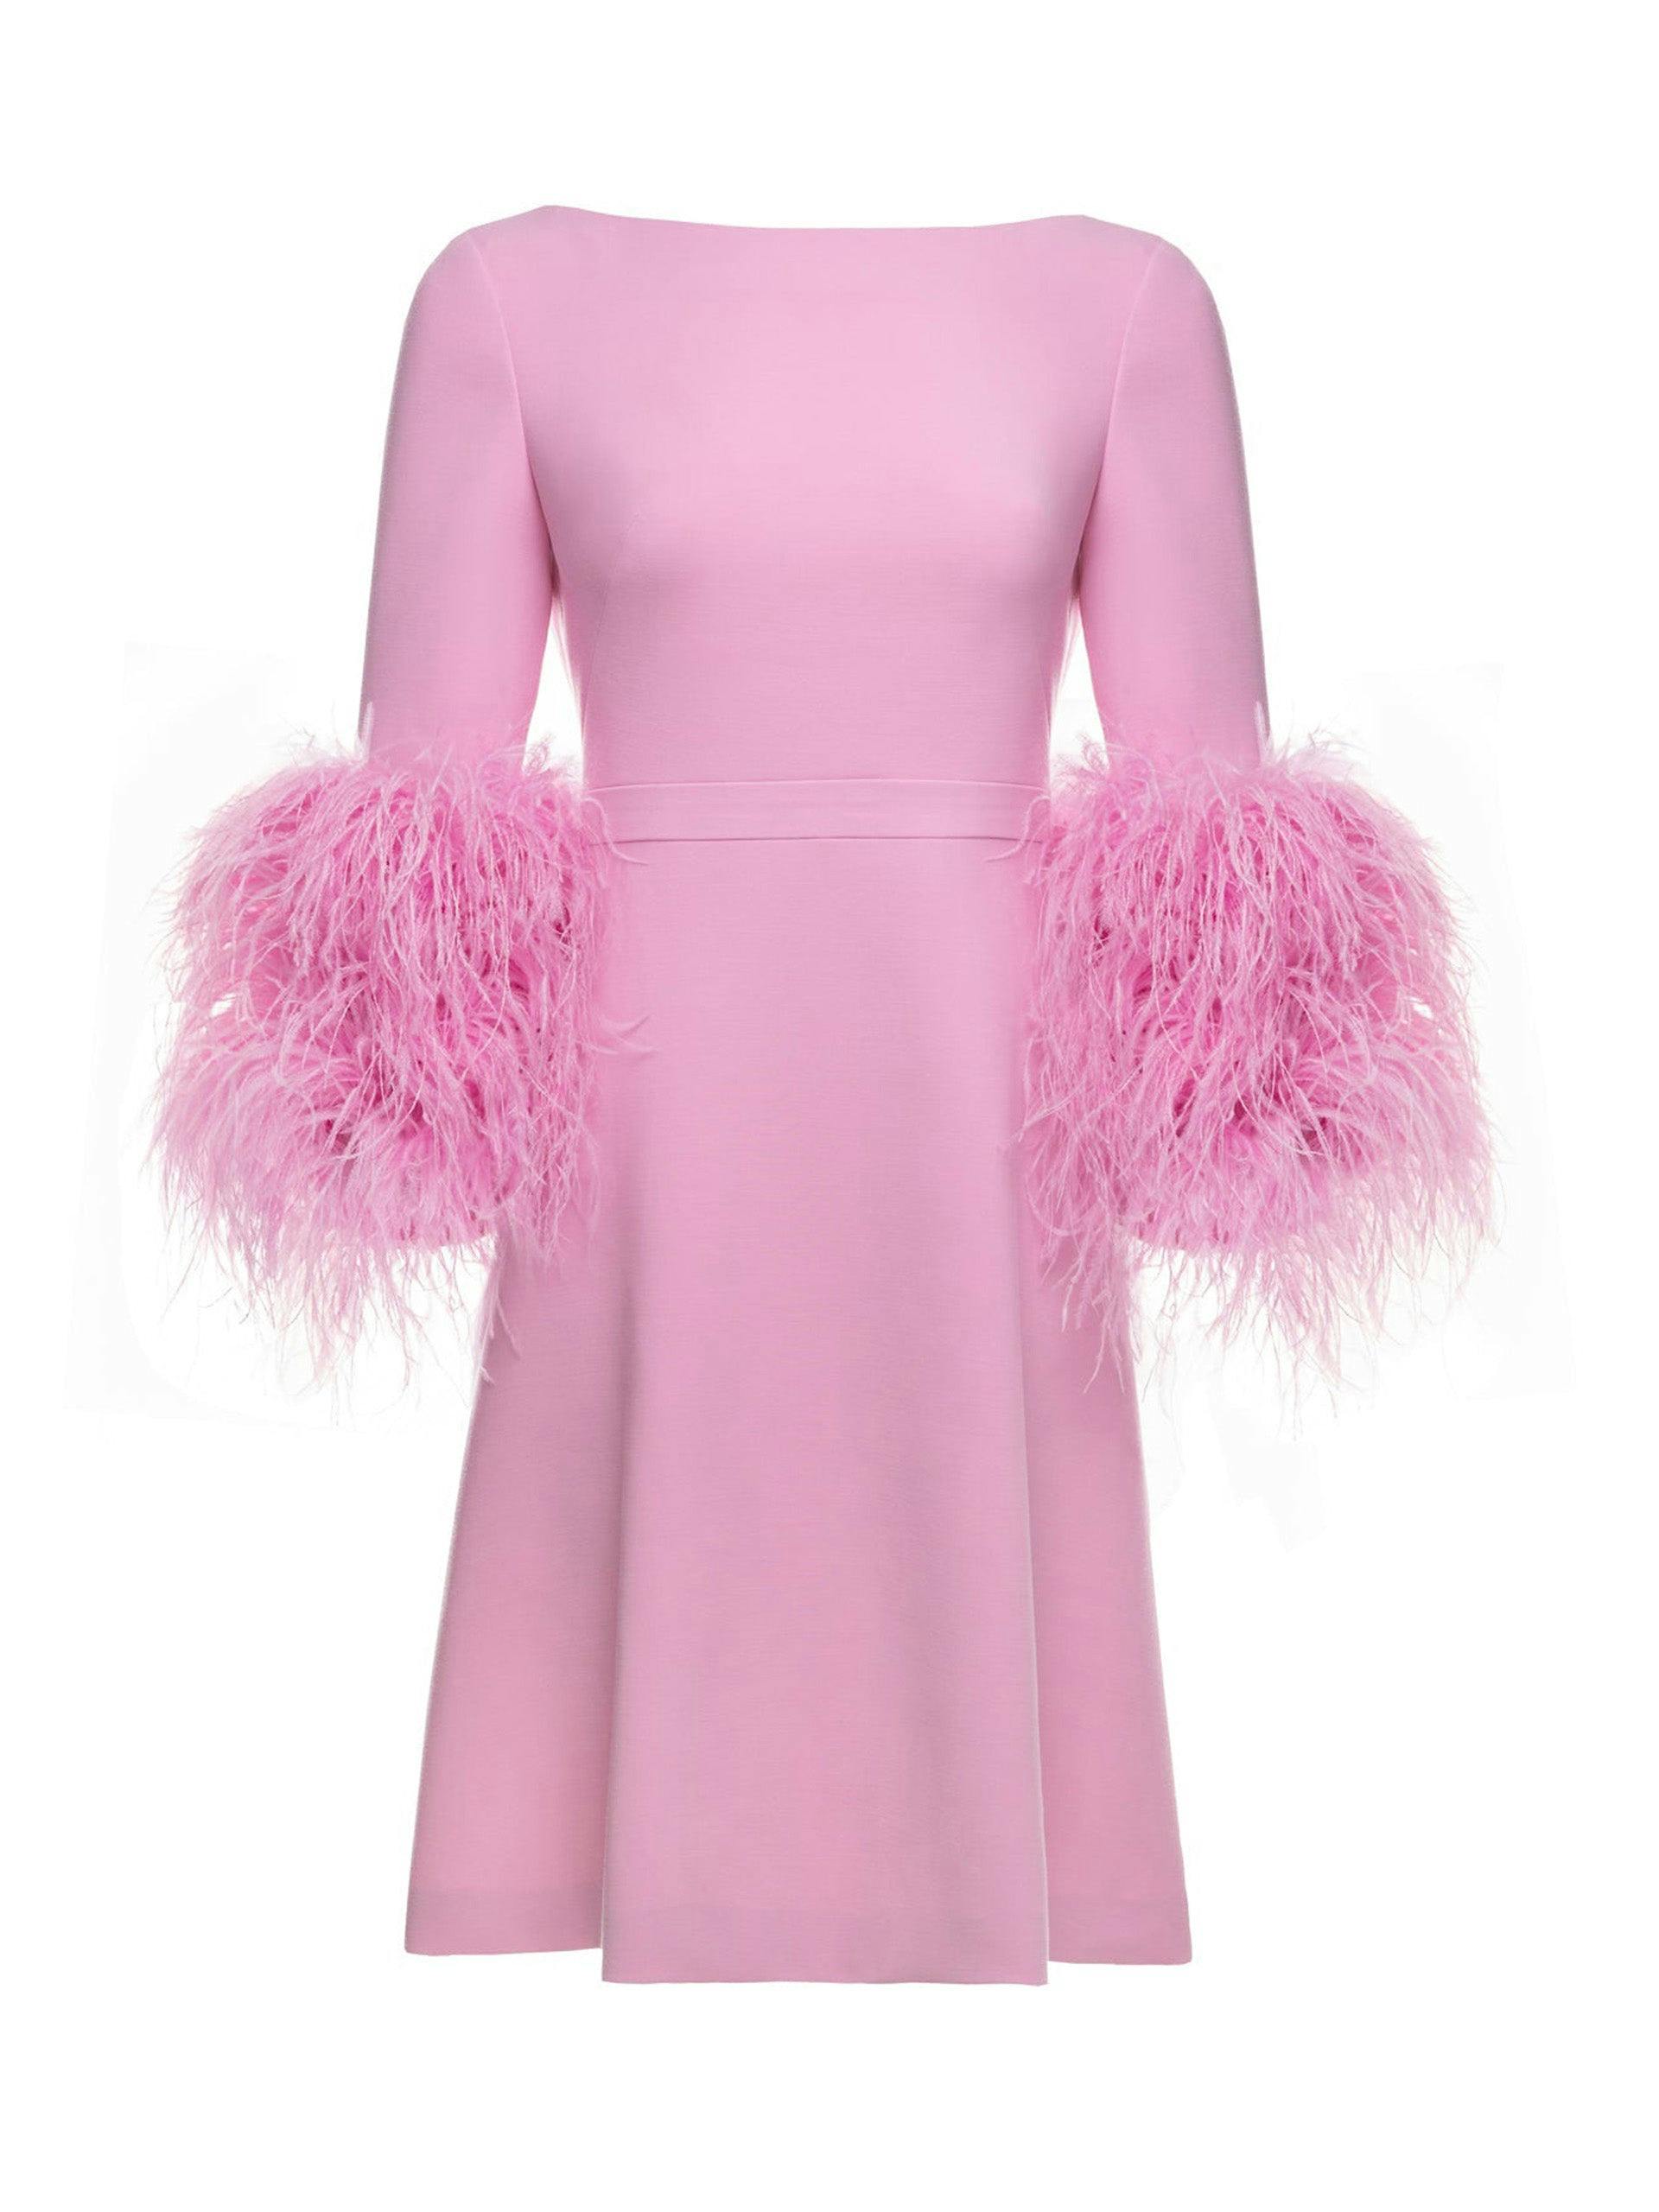 Reign orchid pink crepe dress